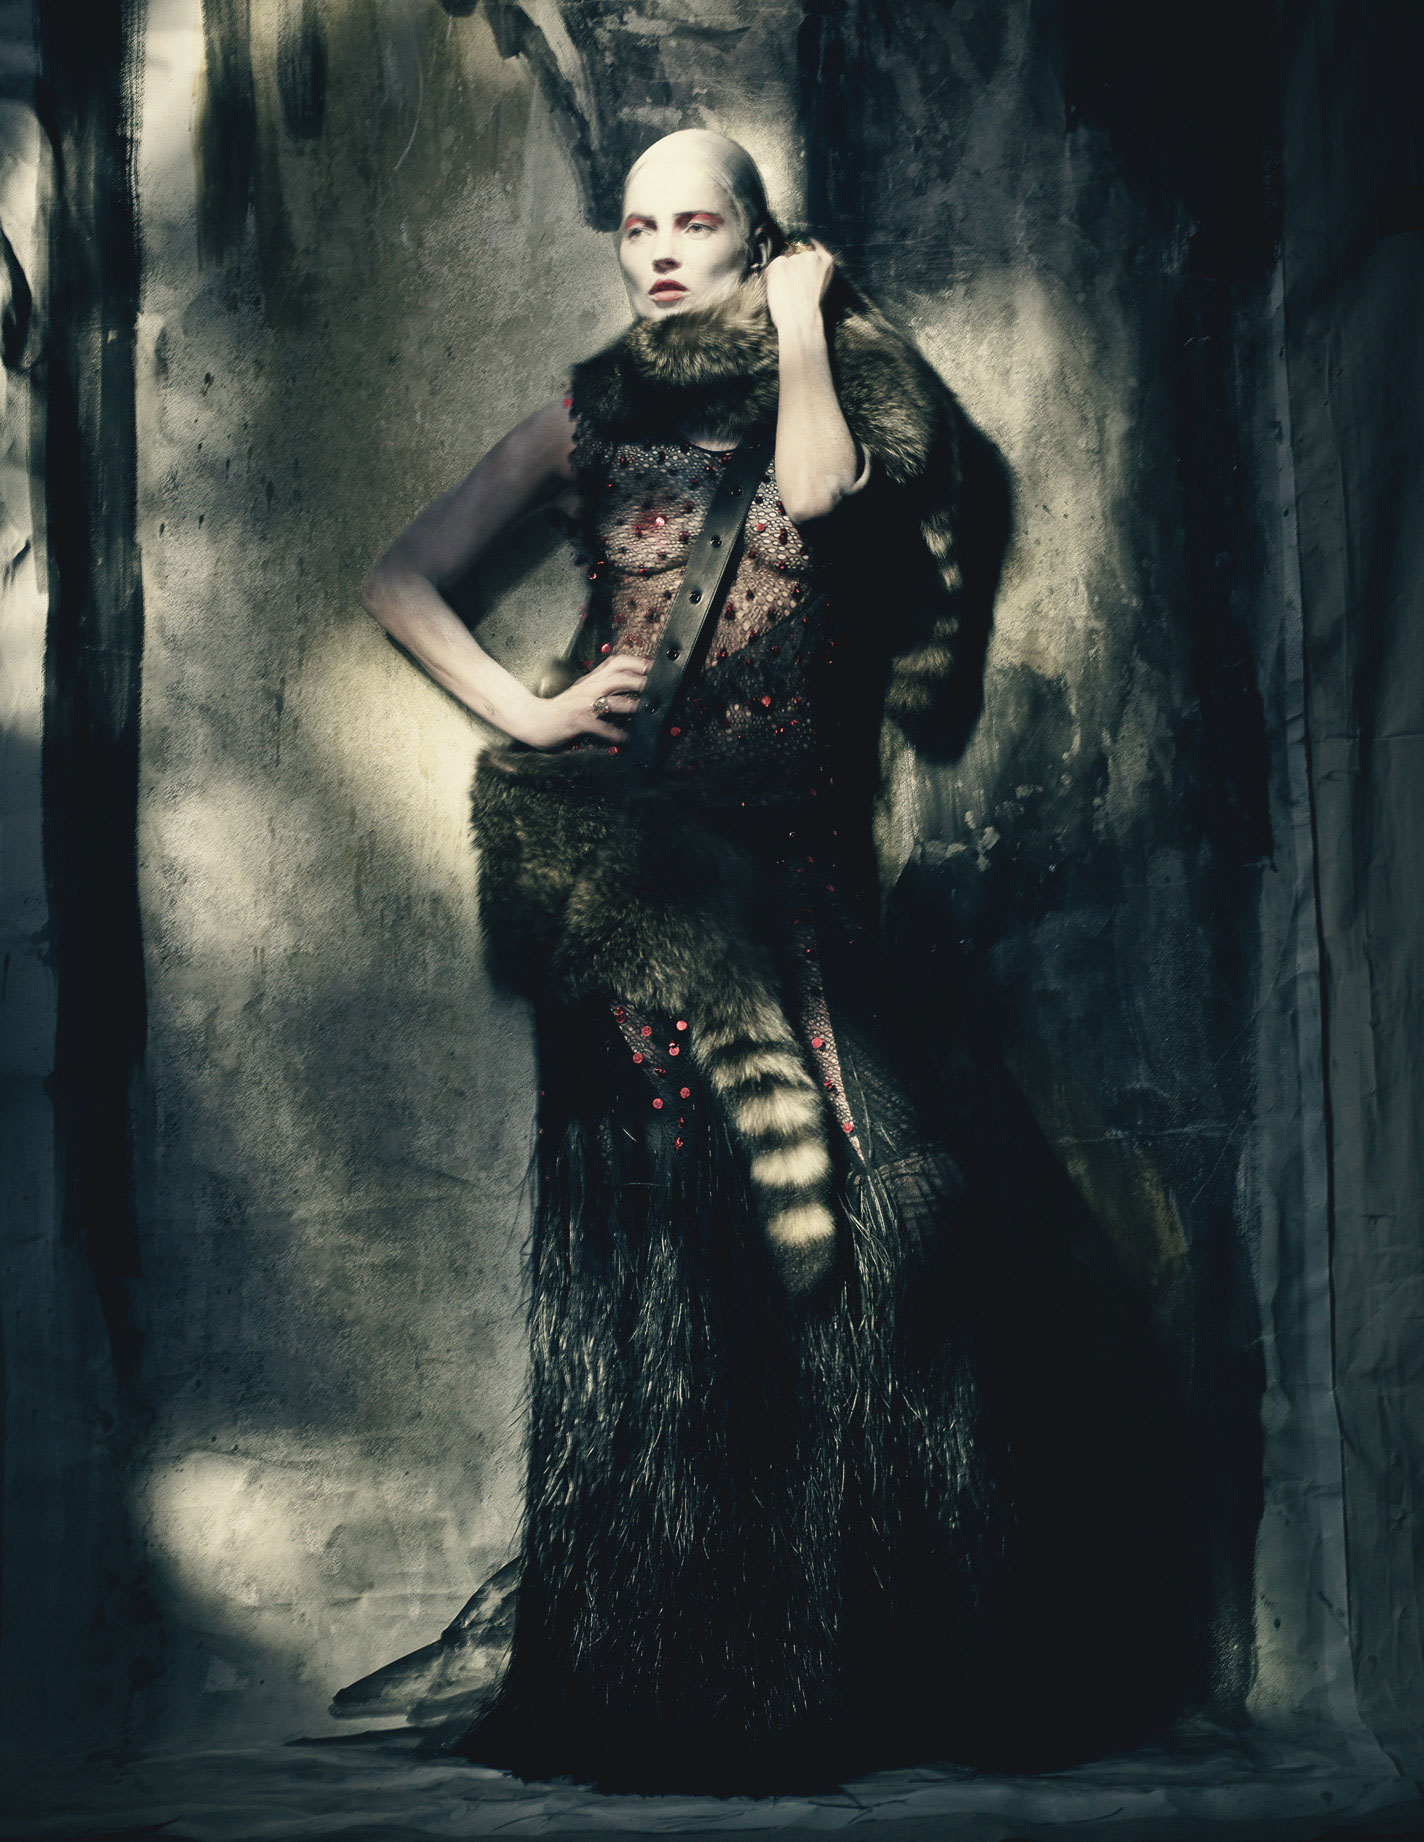 kate-moss-by-paolo-roversi-for-w-magazine-april-2015-7